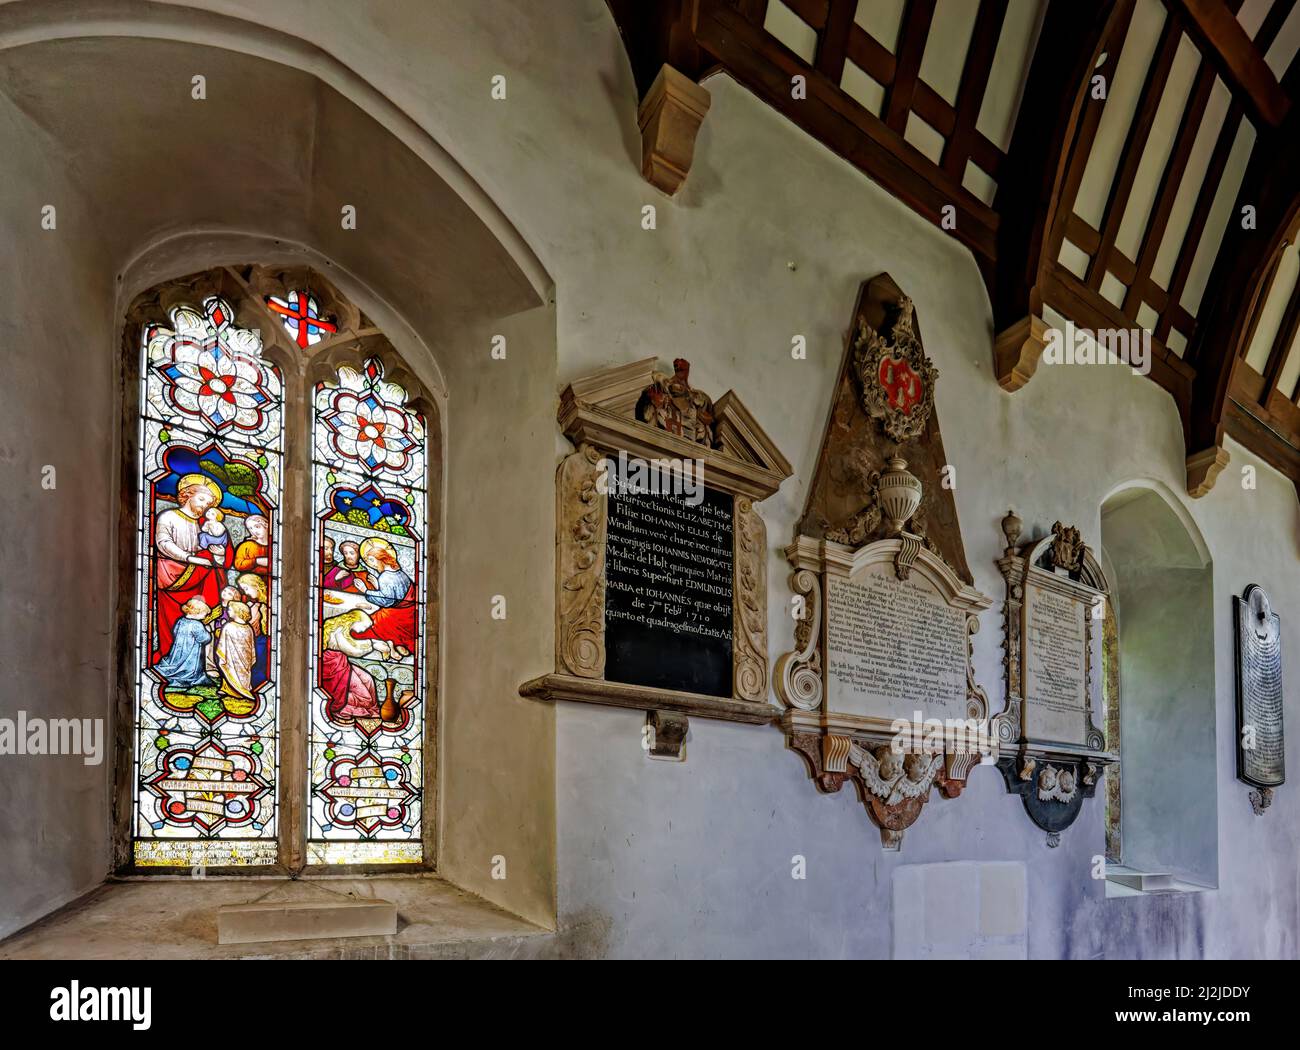 View of stained glass window and church monuments inside the parish Church of St Andrew the Apostle in Holt, a historic town in north Norfolk, England Stock Photo